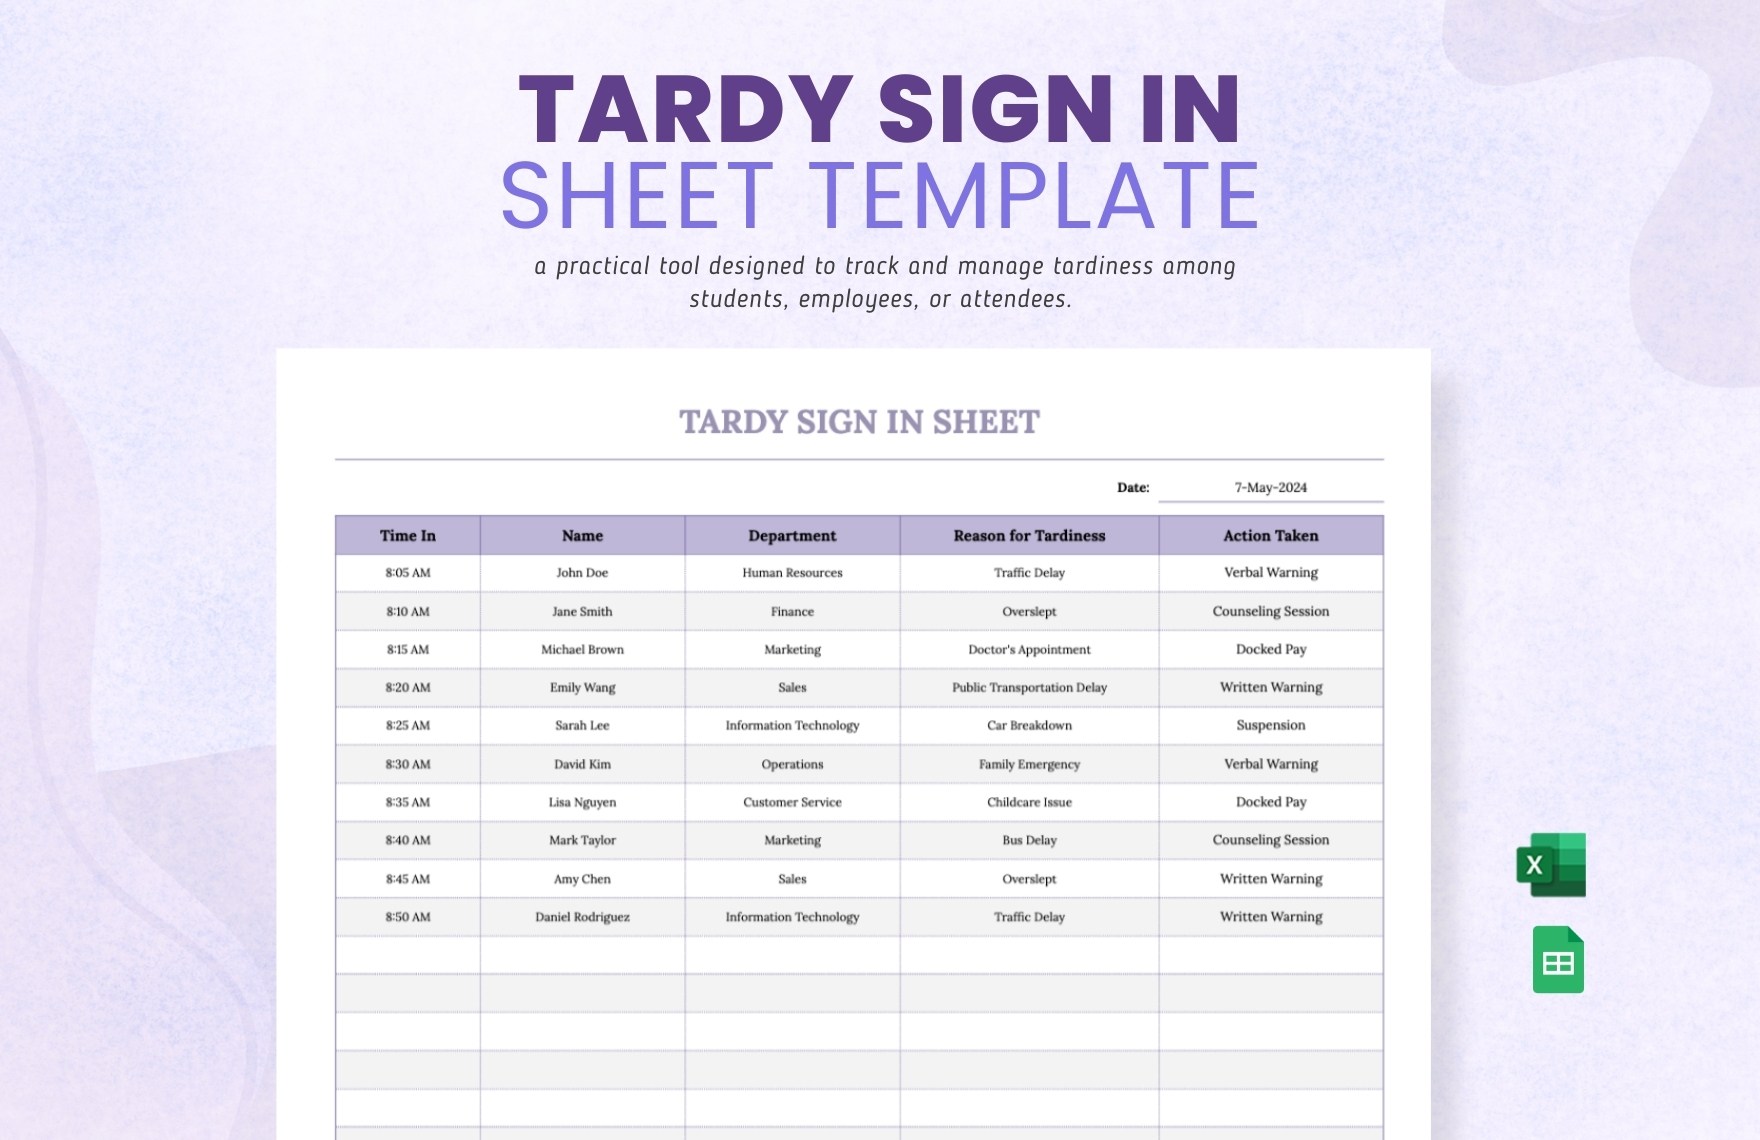 Free Tardy Sign in Sheet Template in Excel, Google Sheets